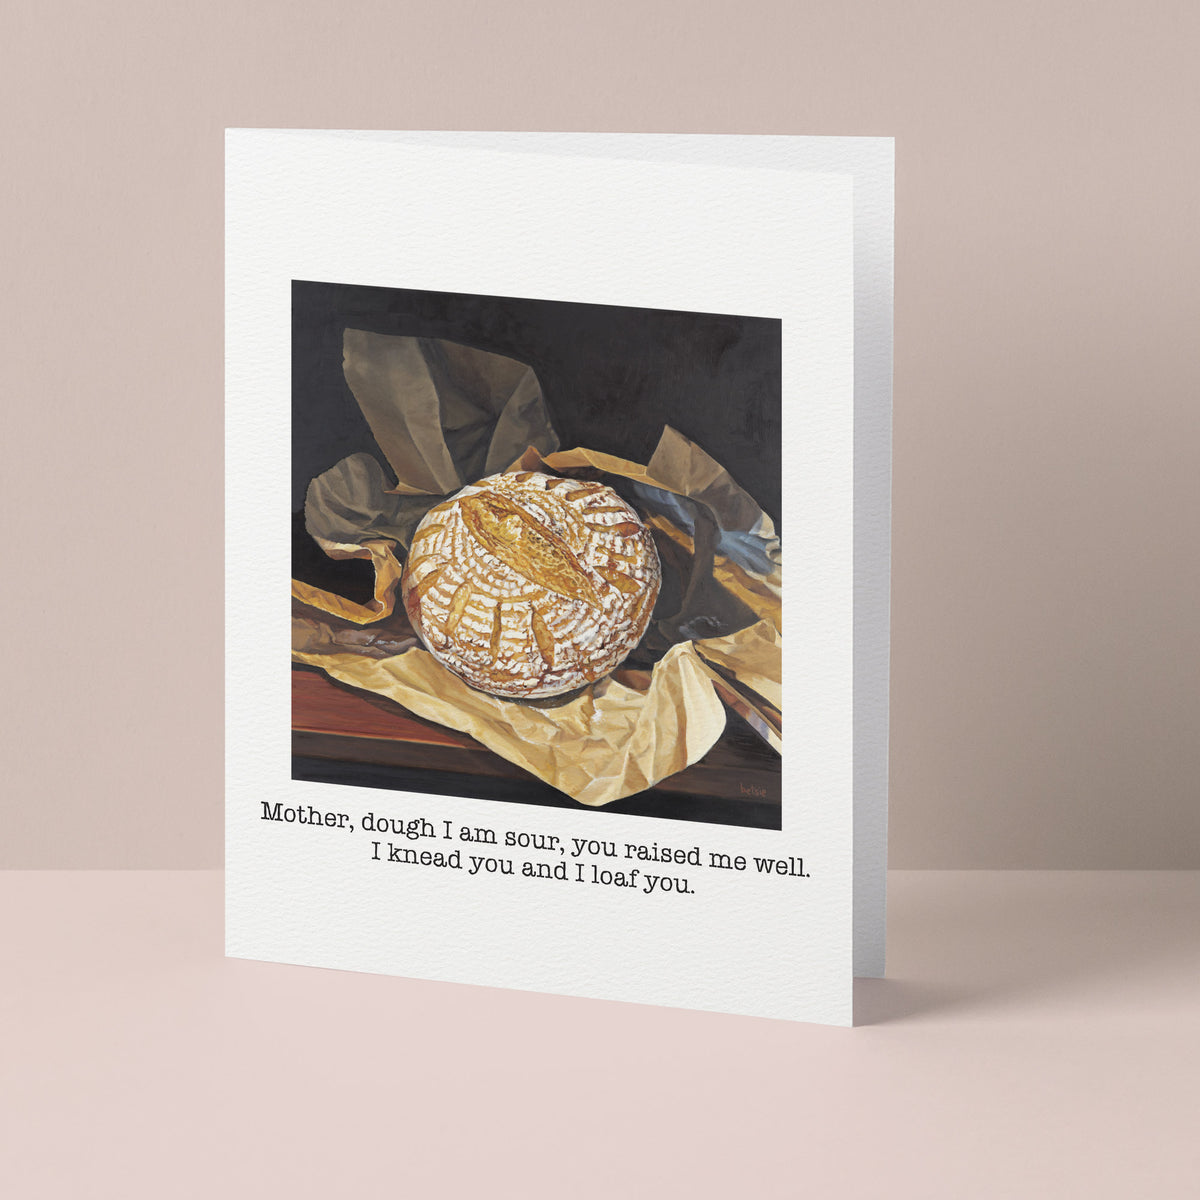 "Mother, dough I am sour" Greeting Card